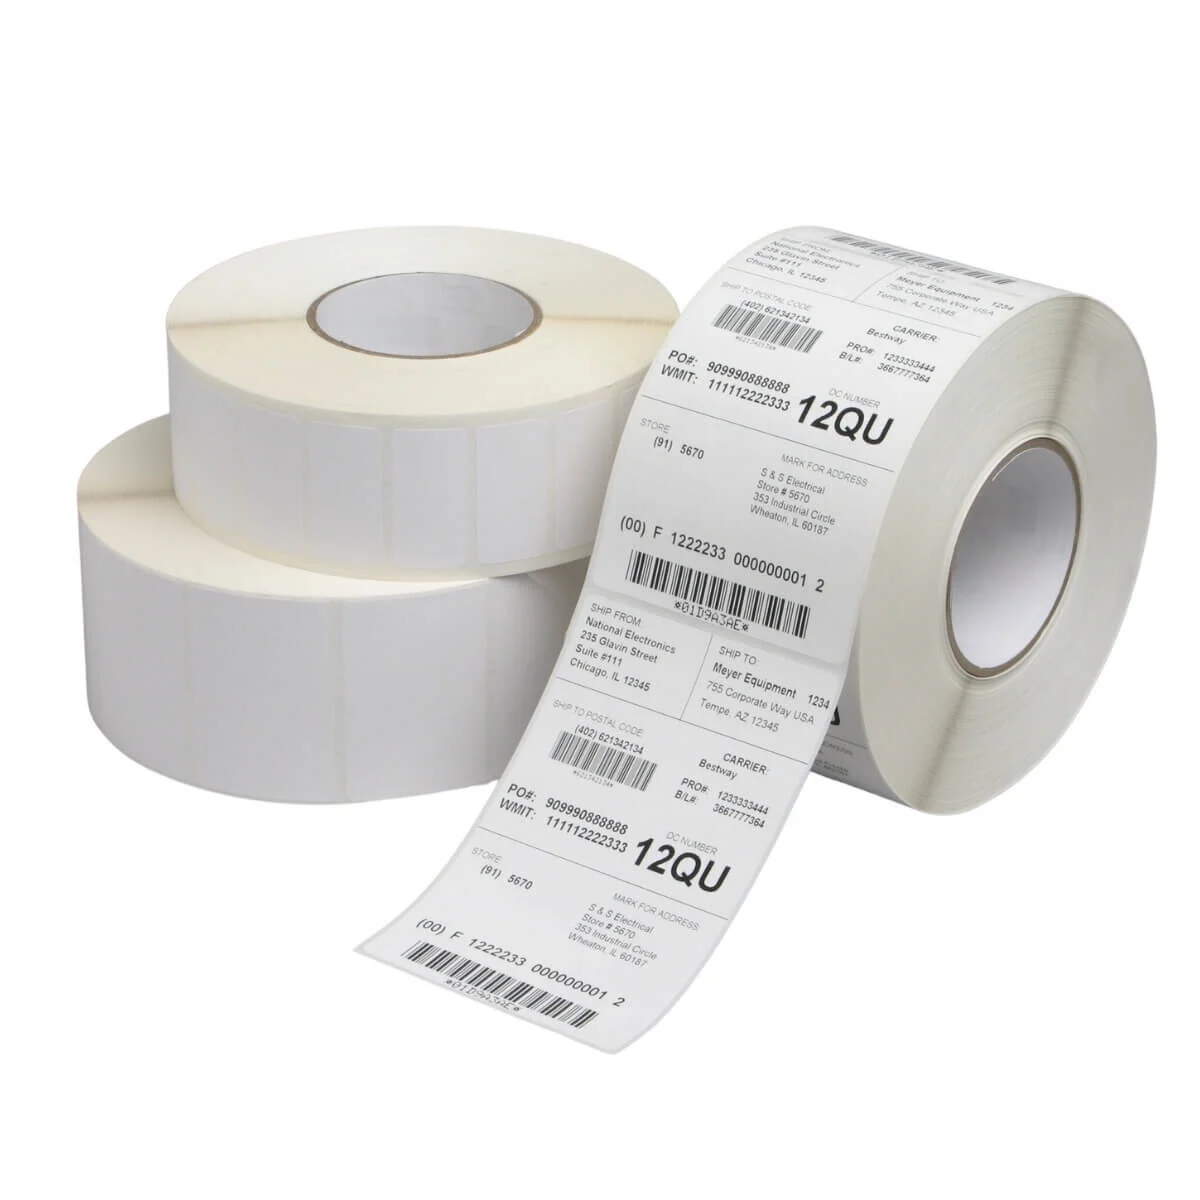 Direct Thermal and Thermal Transfer Labels